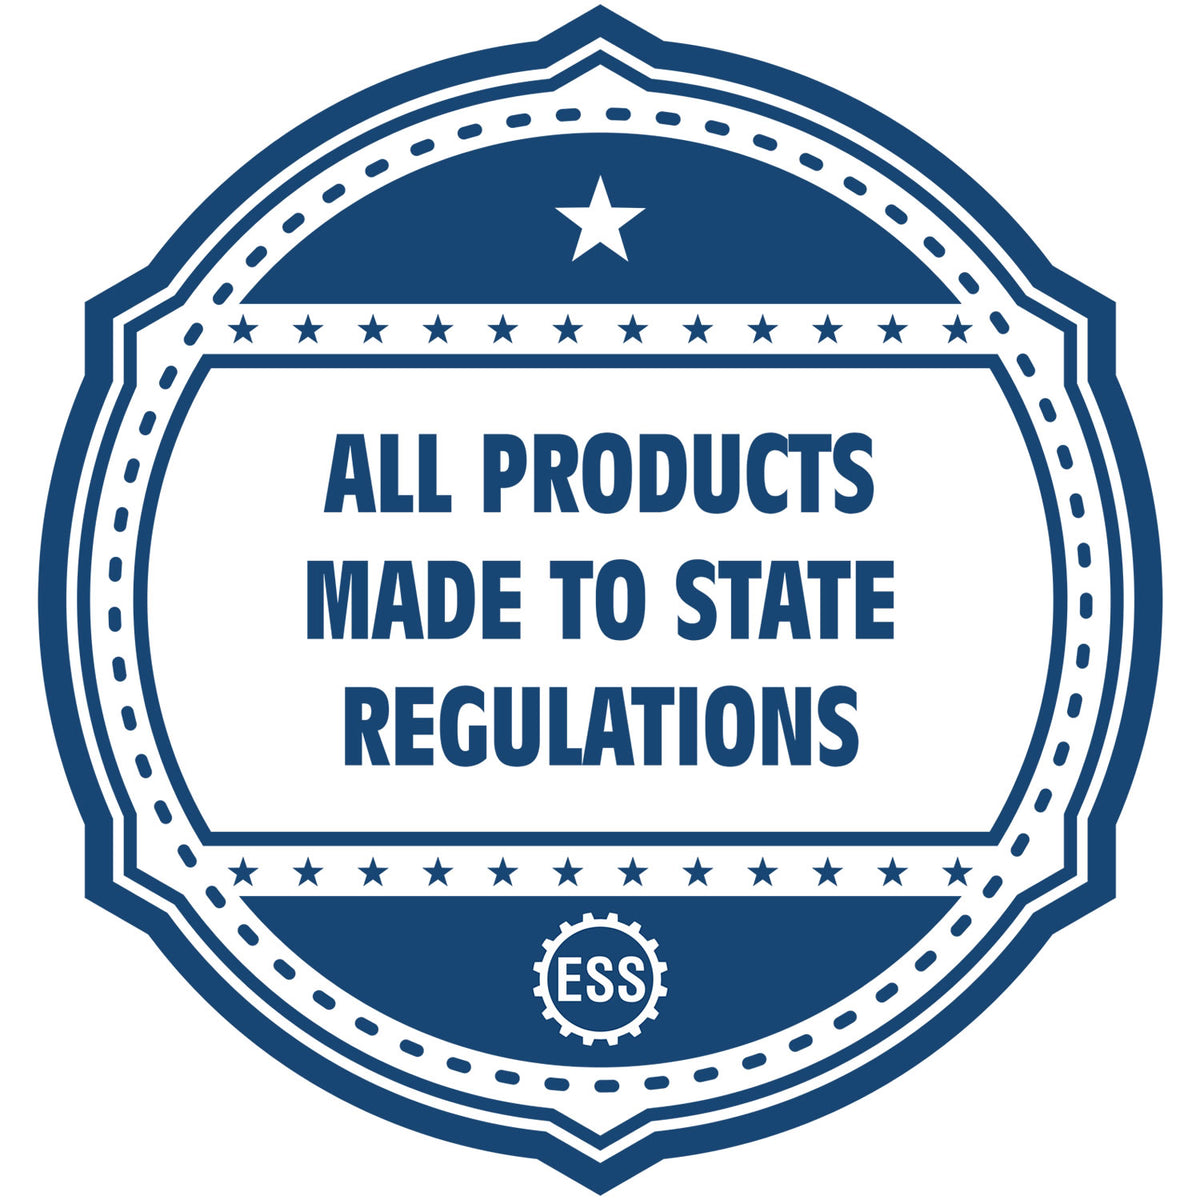 An icon or badge element for the Slim Pre-Inked Rectangular Notary Stamp for Puerto Rico showing that this product is made in compliance with state regulations.